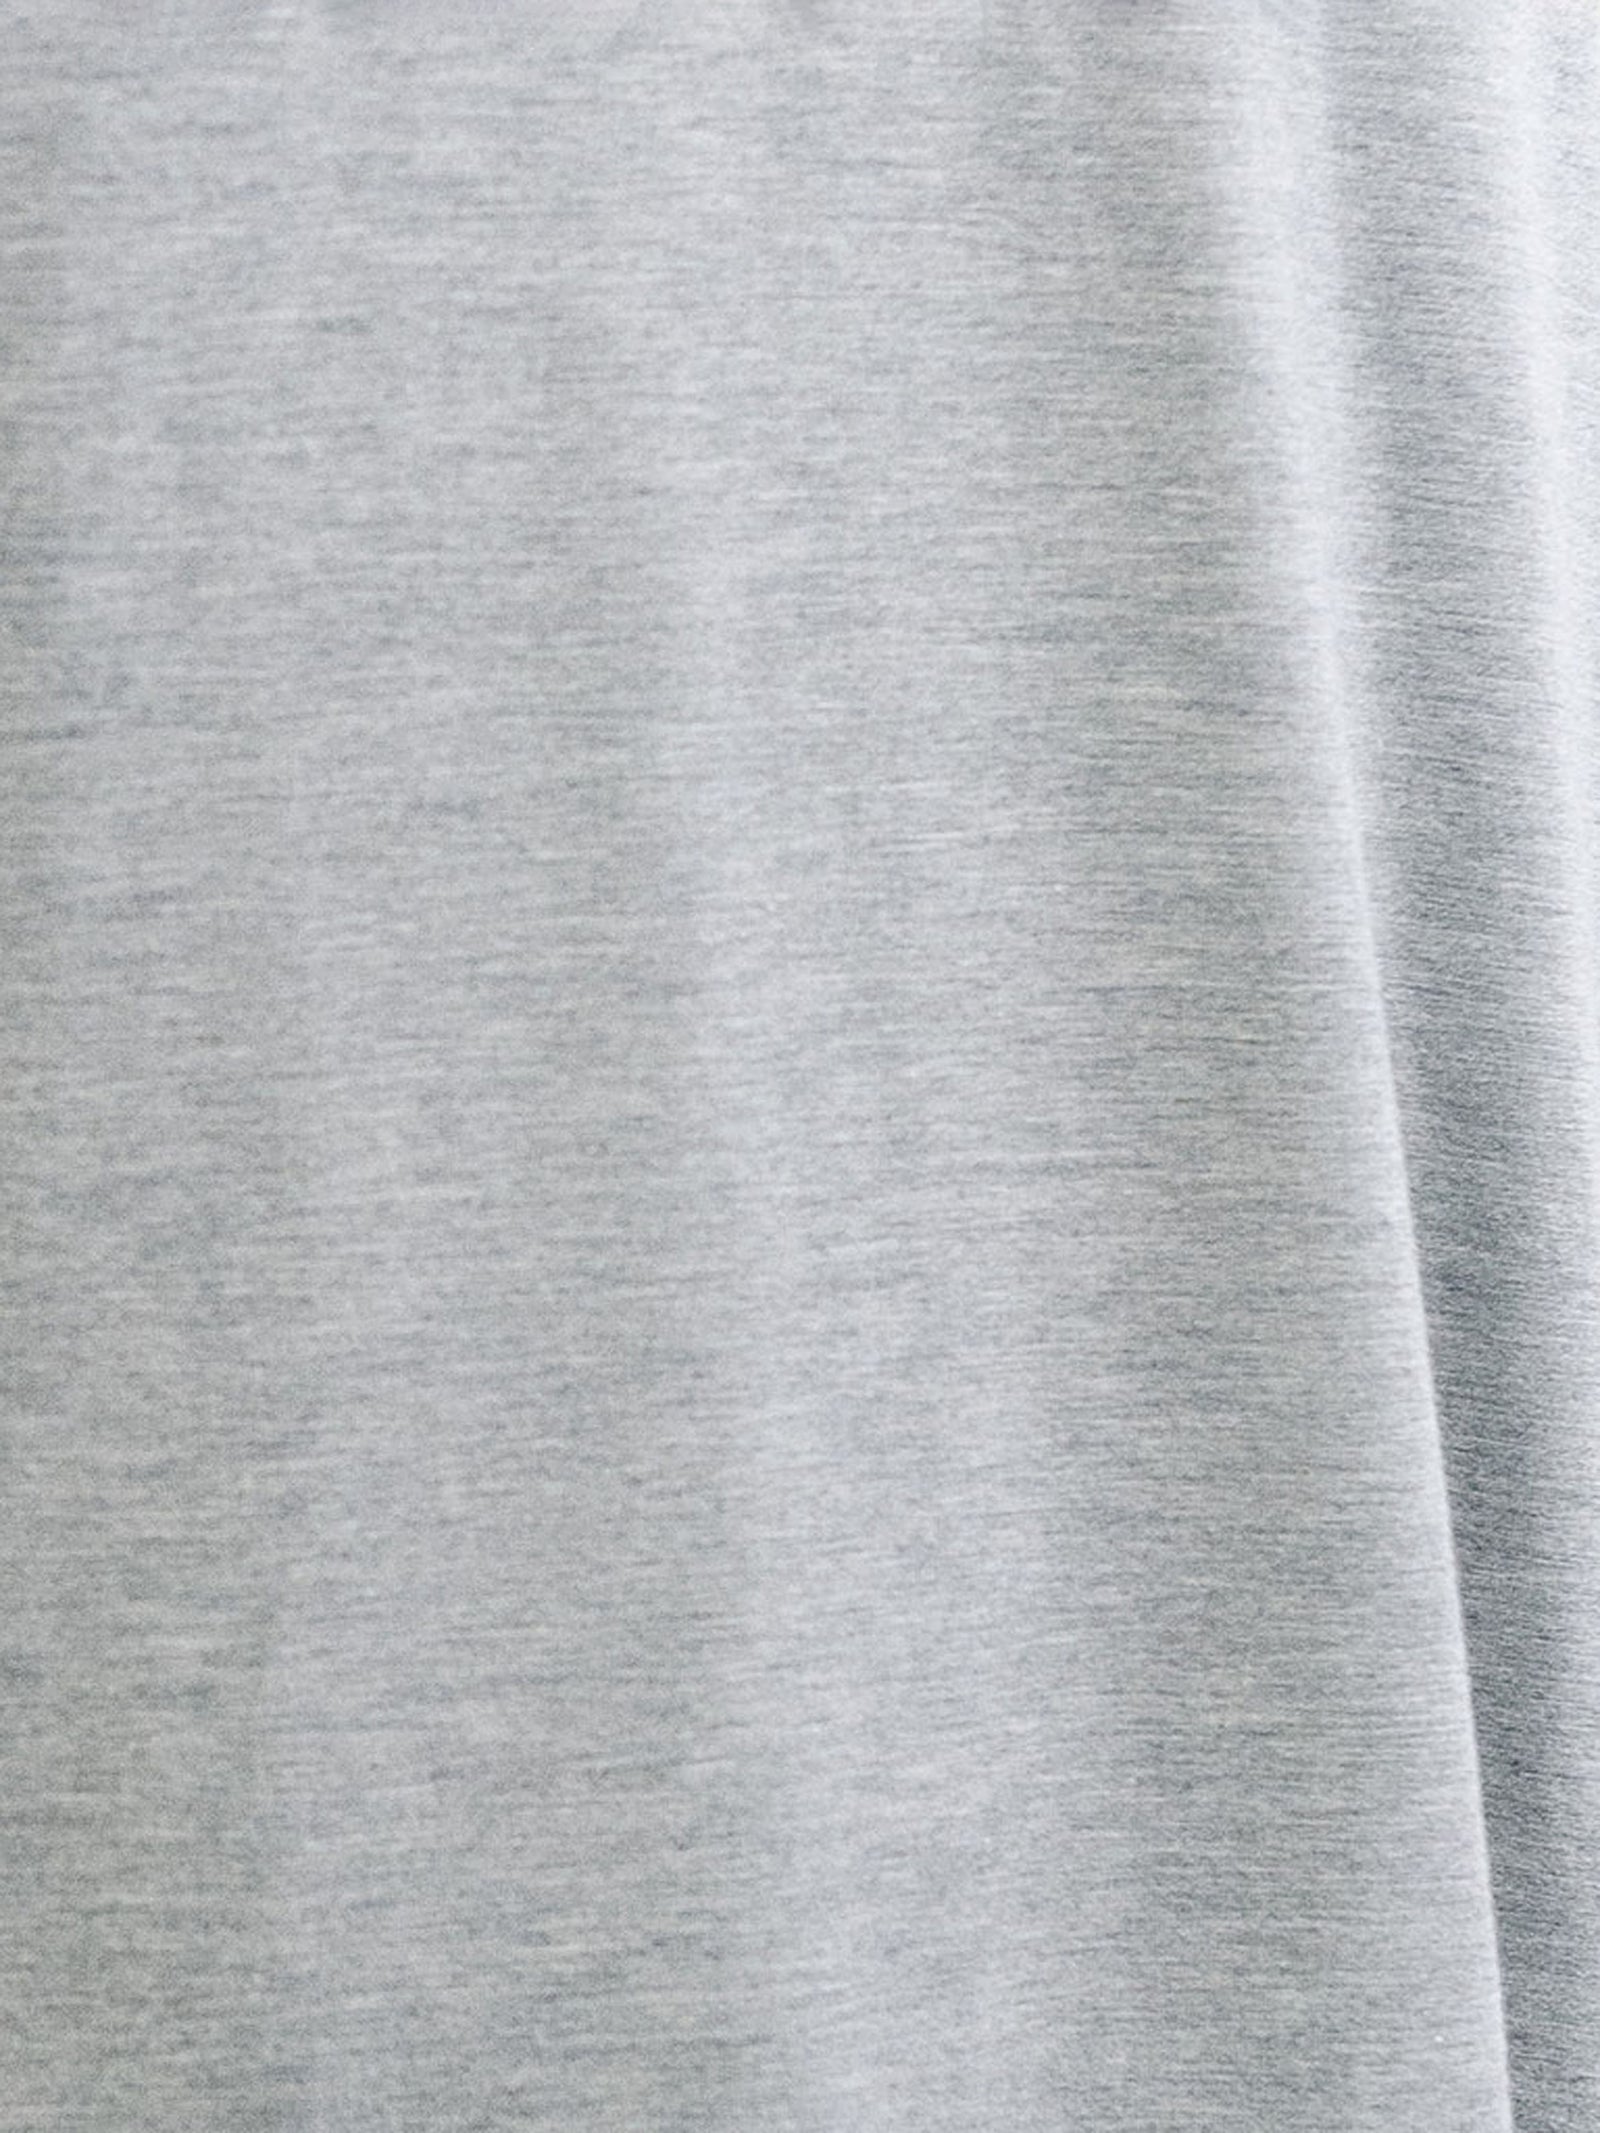 Heather Grey Men's Stretch-Knit Bamboo Lounge Tee. The photo is taken close up so as to better show the texture of the material.